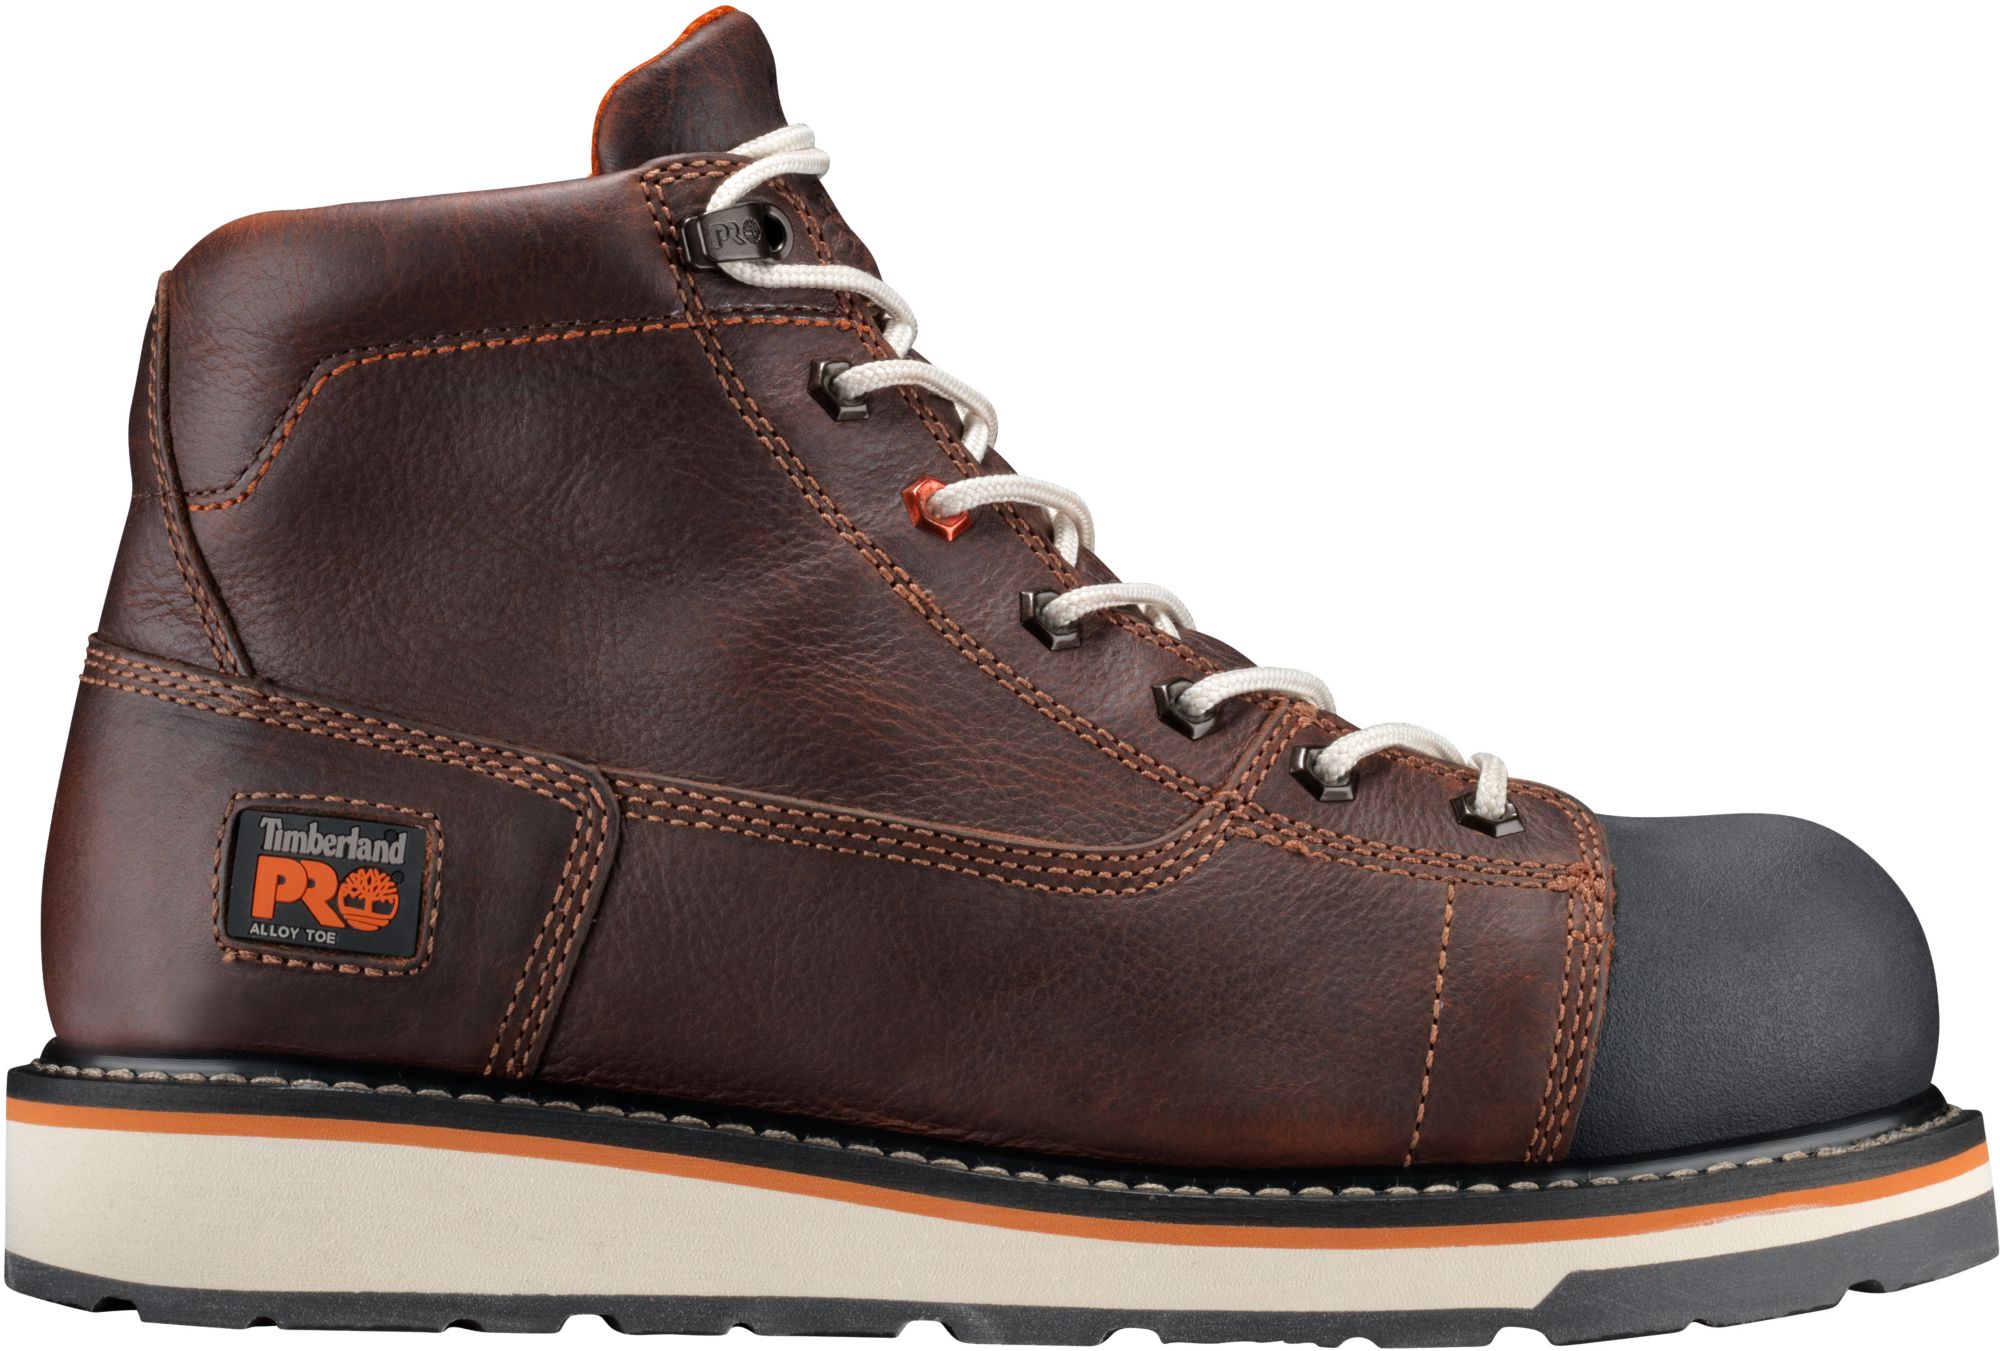 Gridworks Alloy Toe 6'' Work Boots 